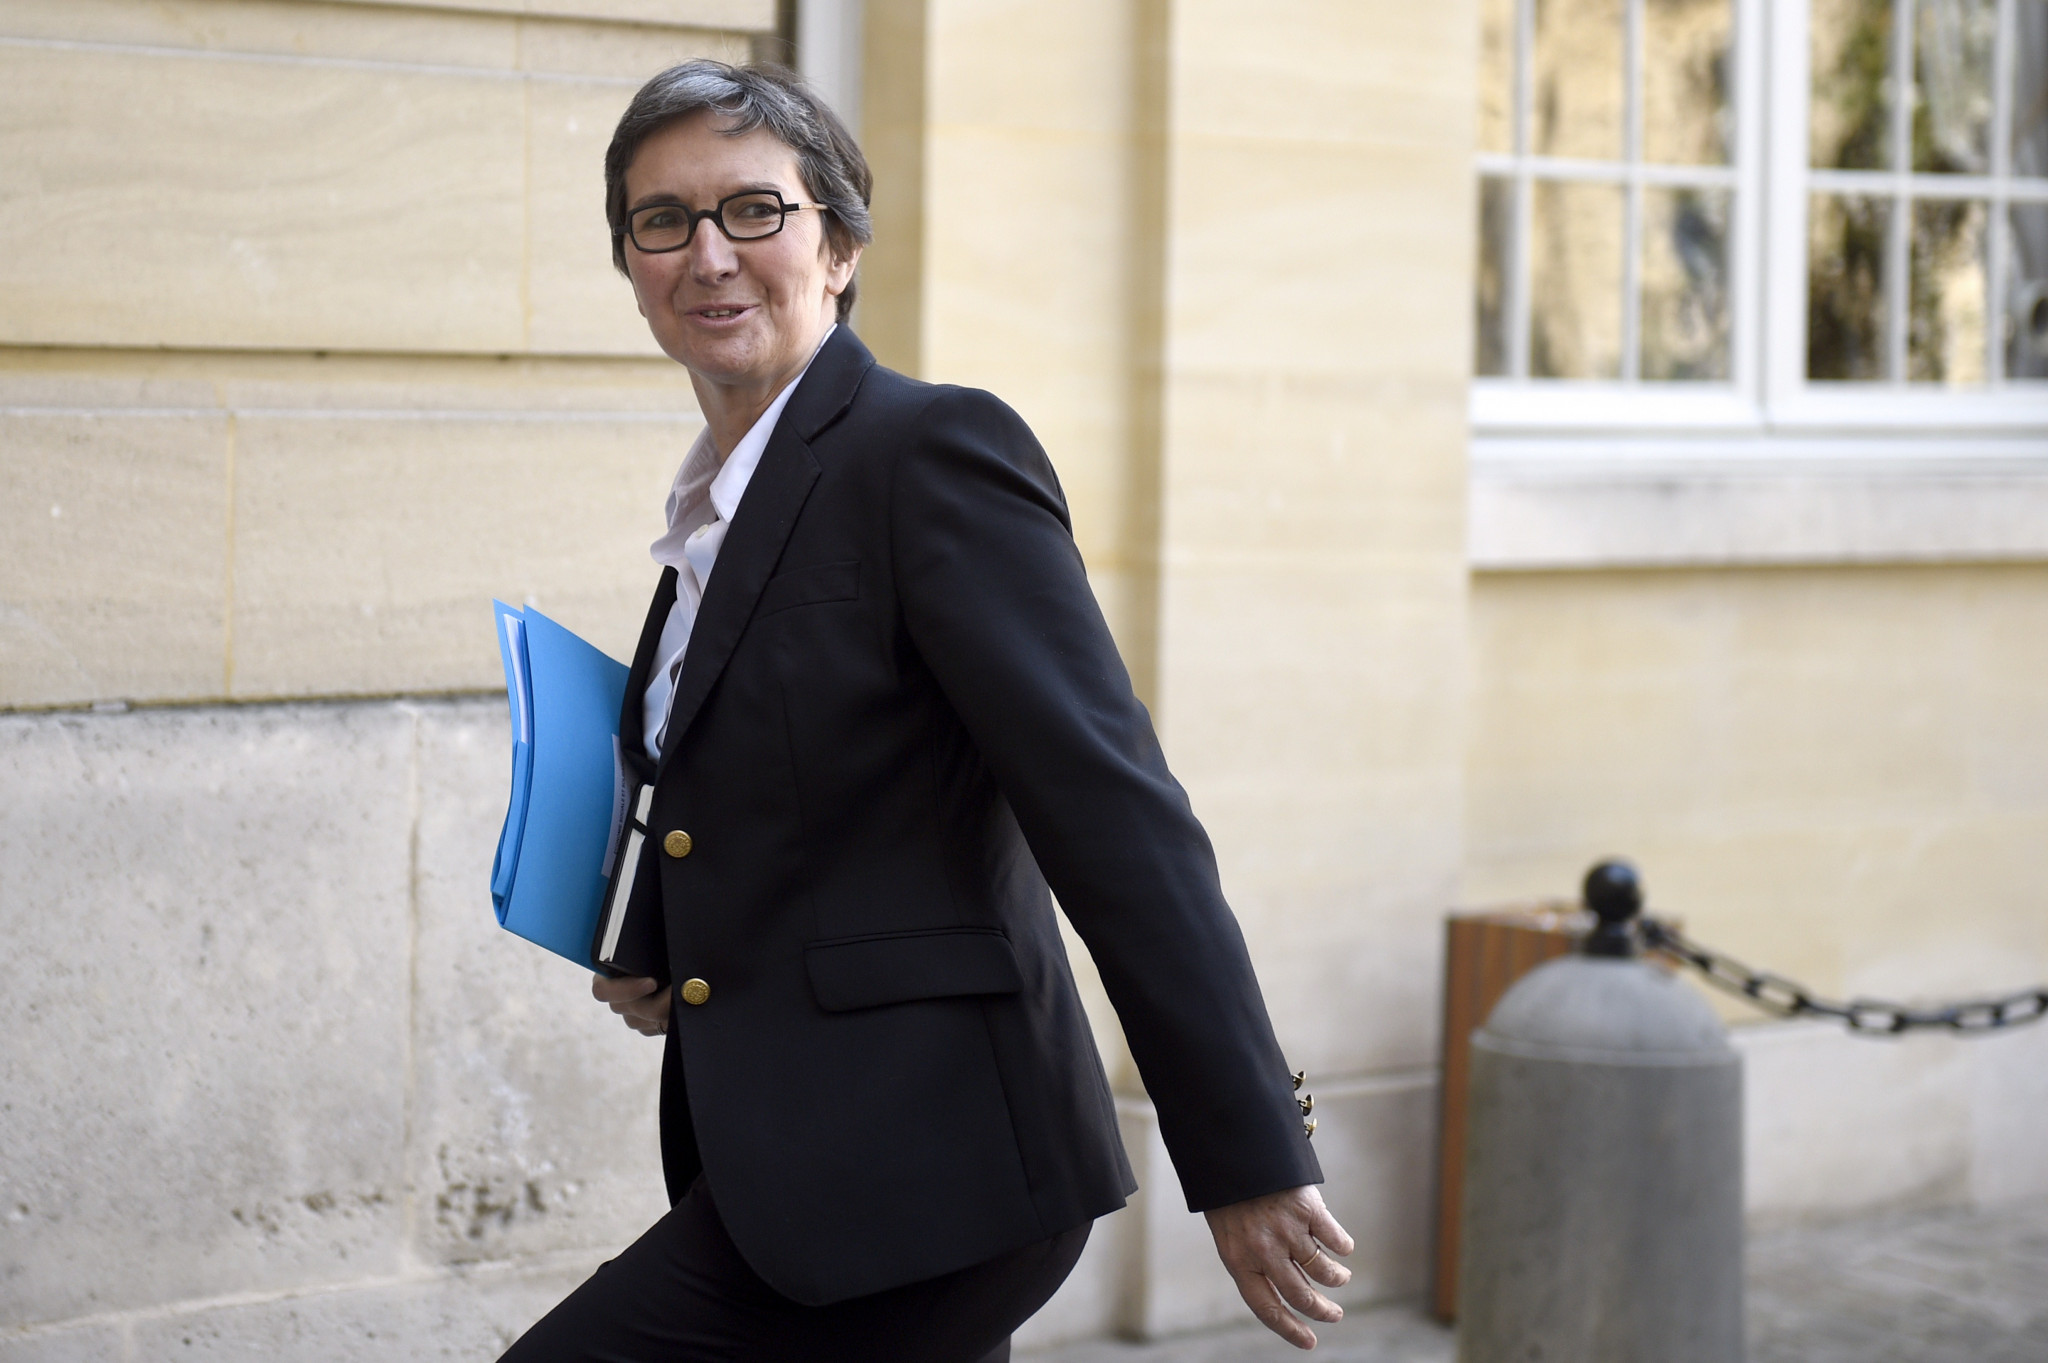 Valérie Fourneyron chaired the first Foundation Board meeting of the ITA ©Getty Images 